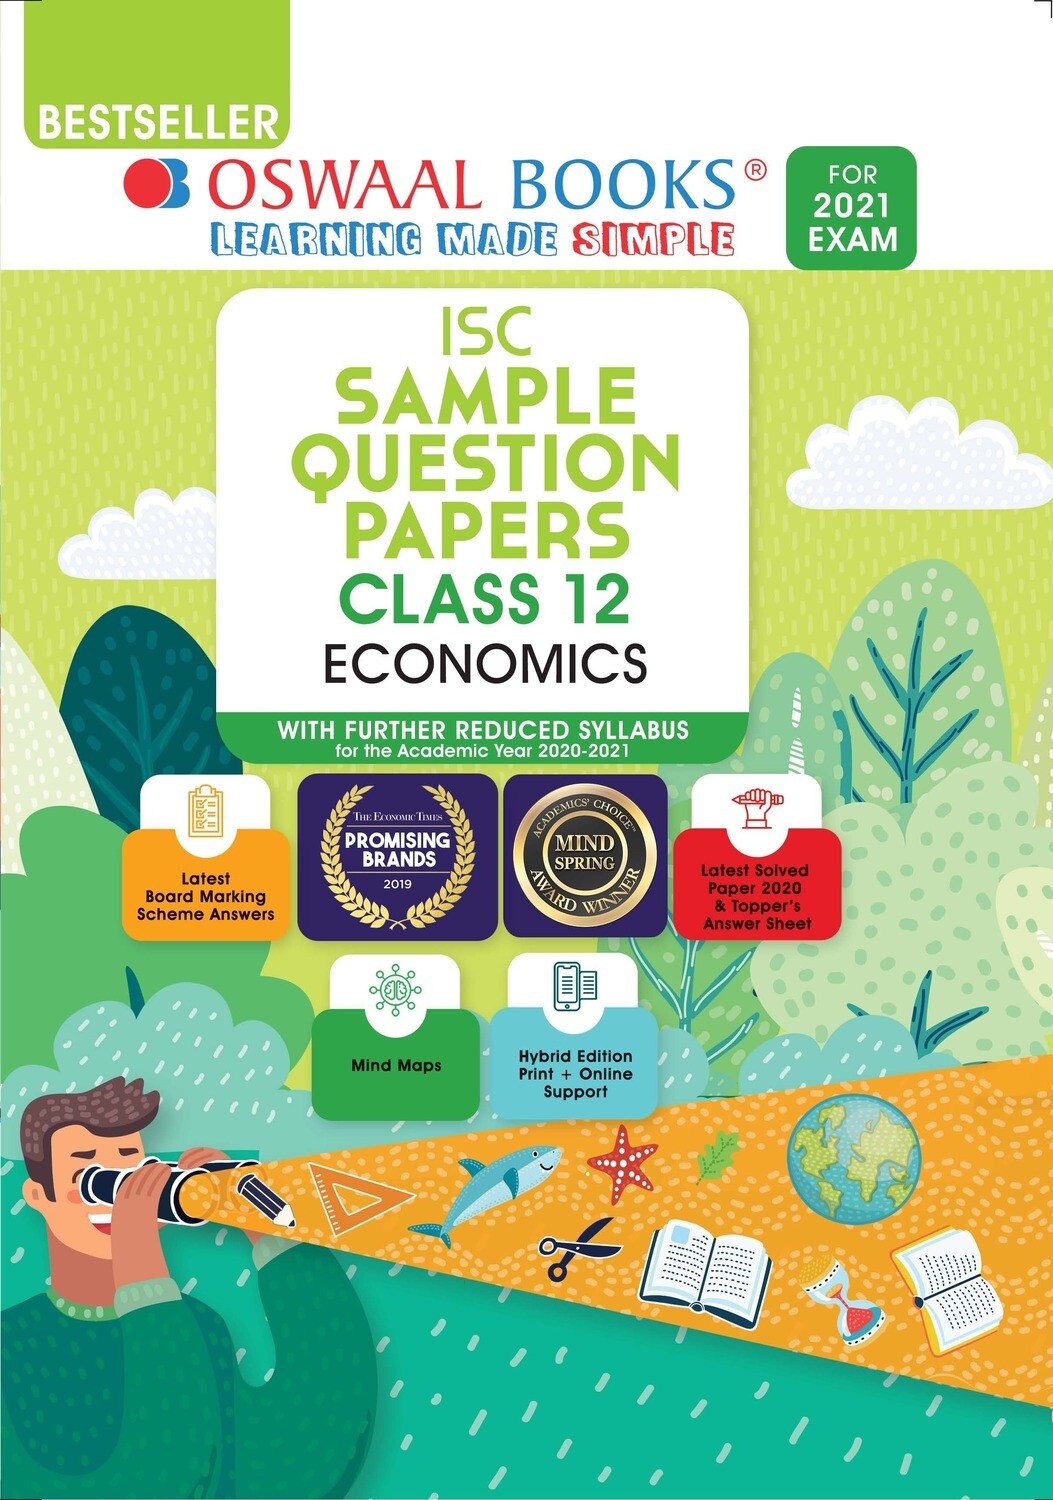 Buy e-book: Oswaal ISC Sample Question Papers Class 12 Economics (For 2021 Exam): 9789354230752